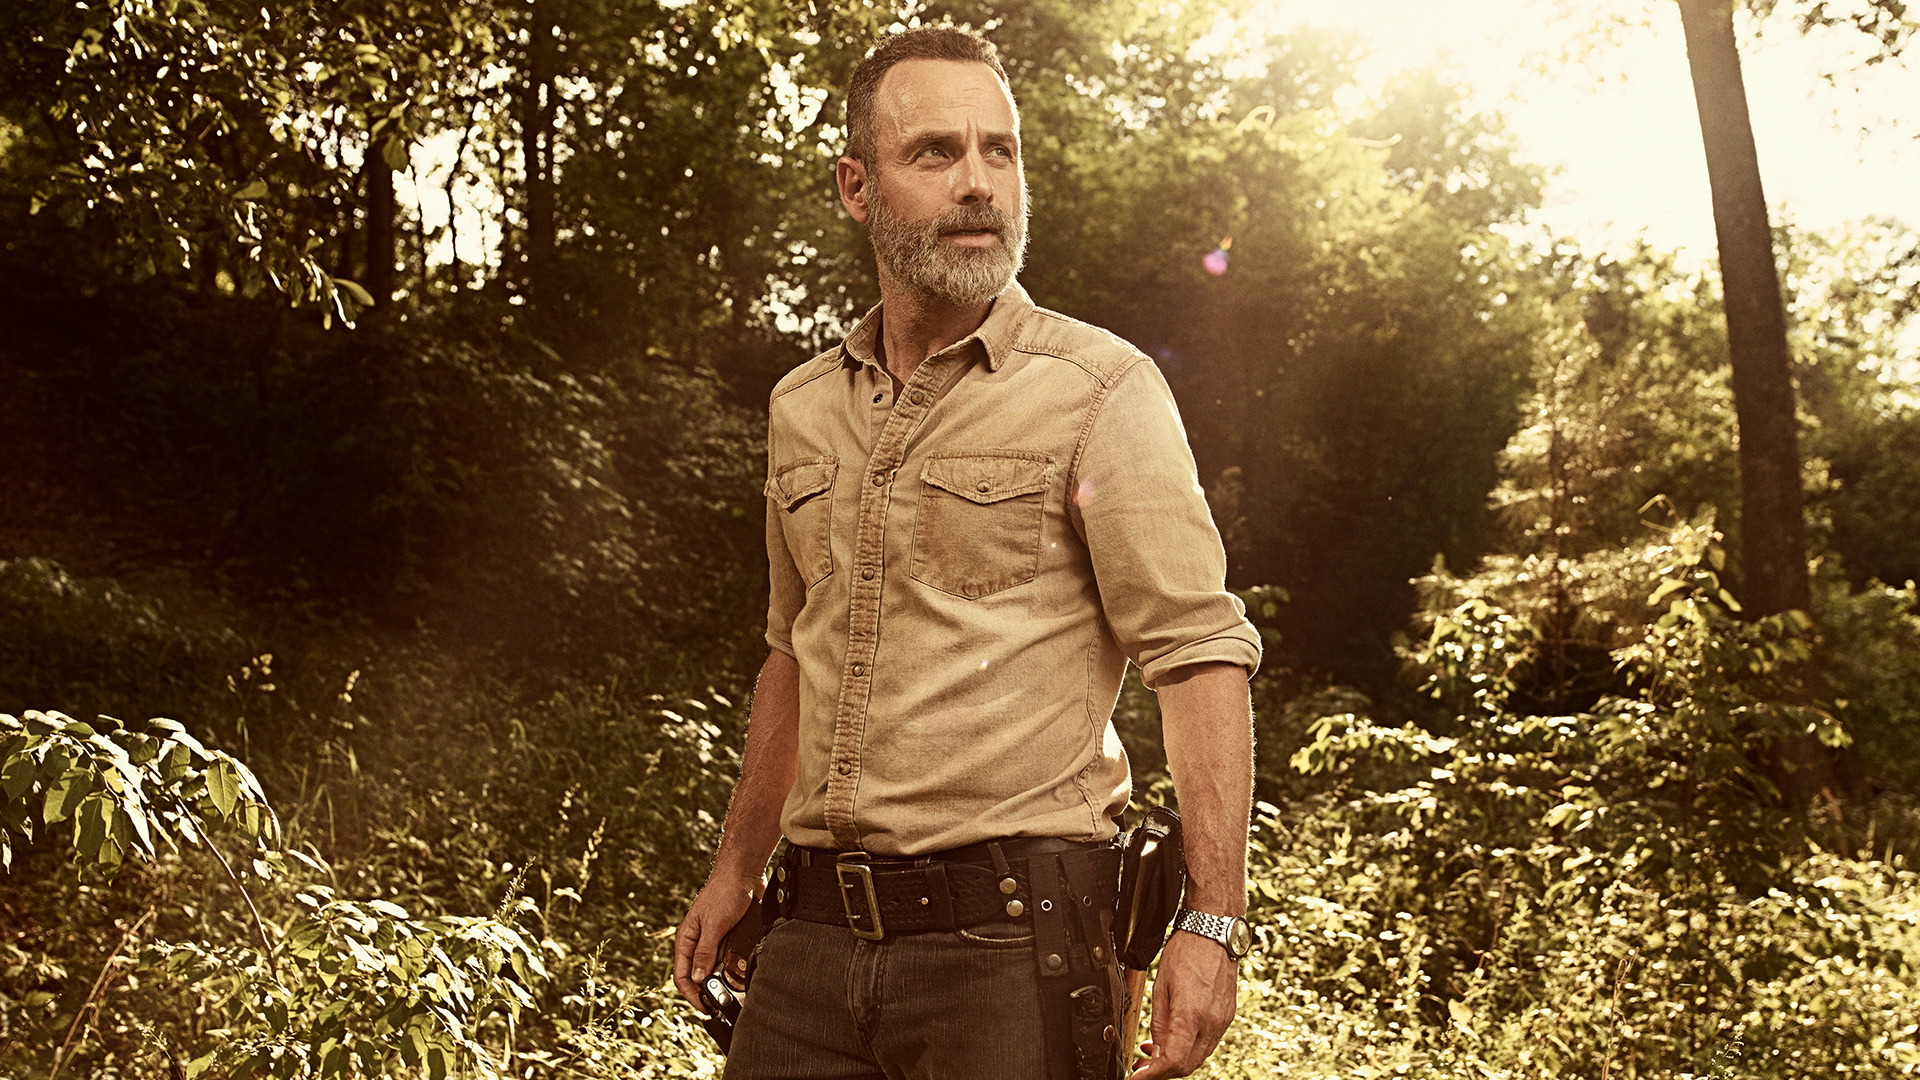 Rick Grimes from The Walking Dead